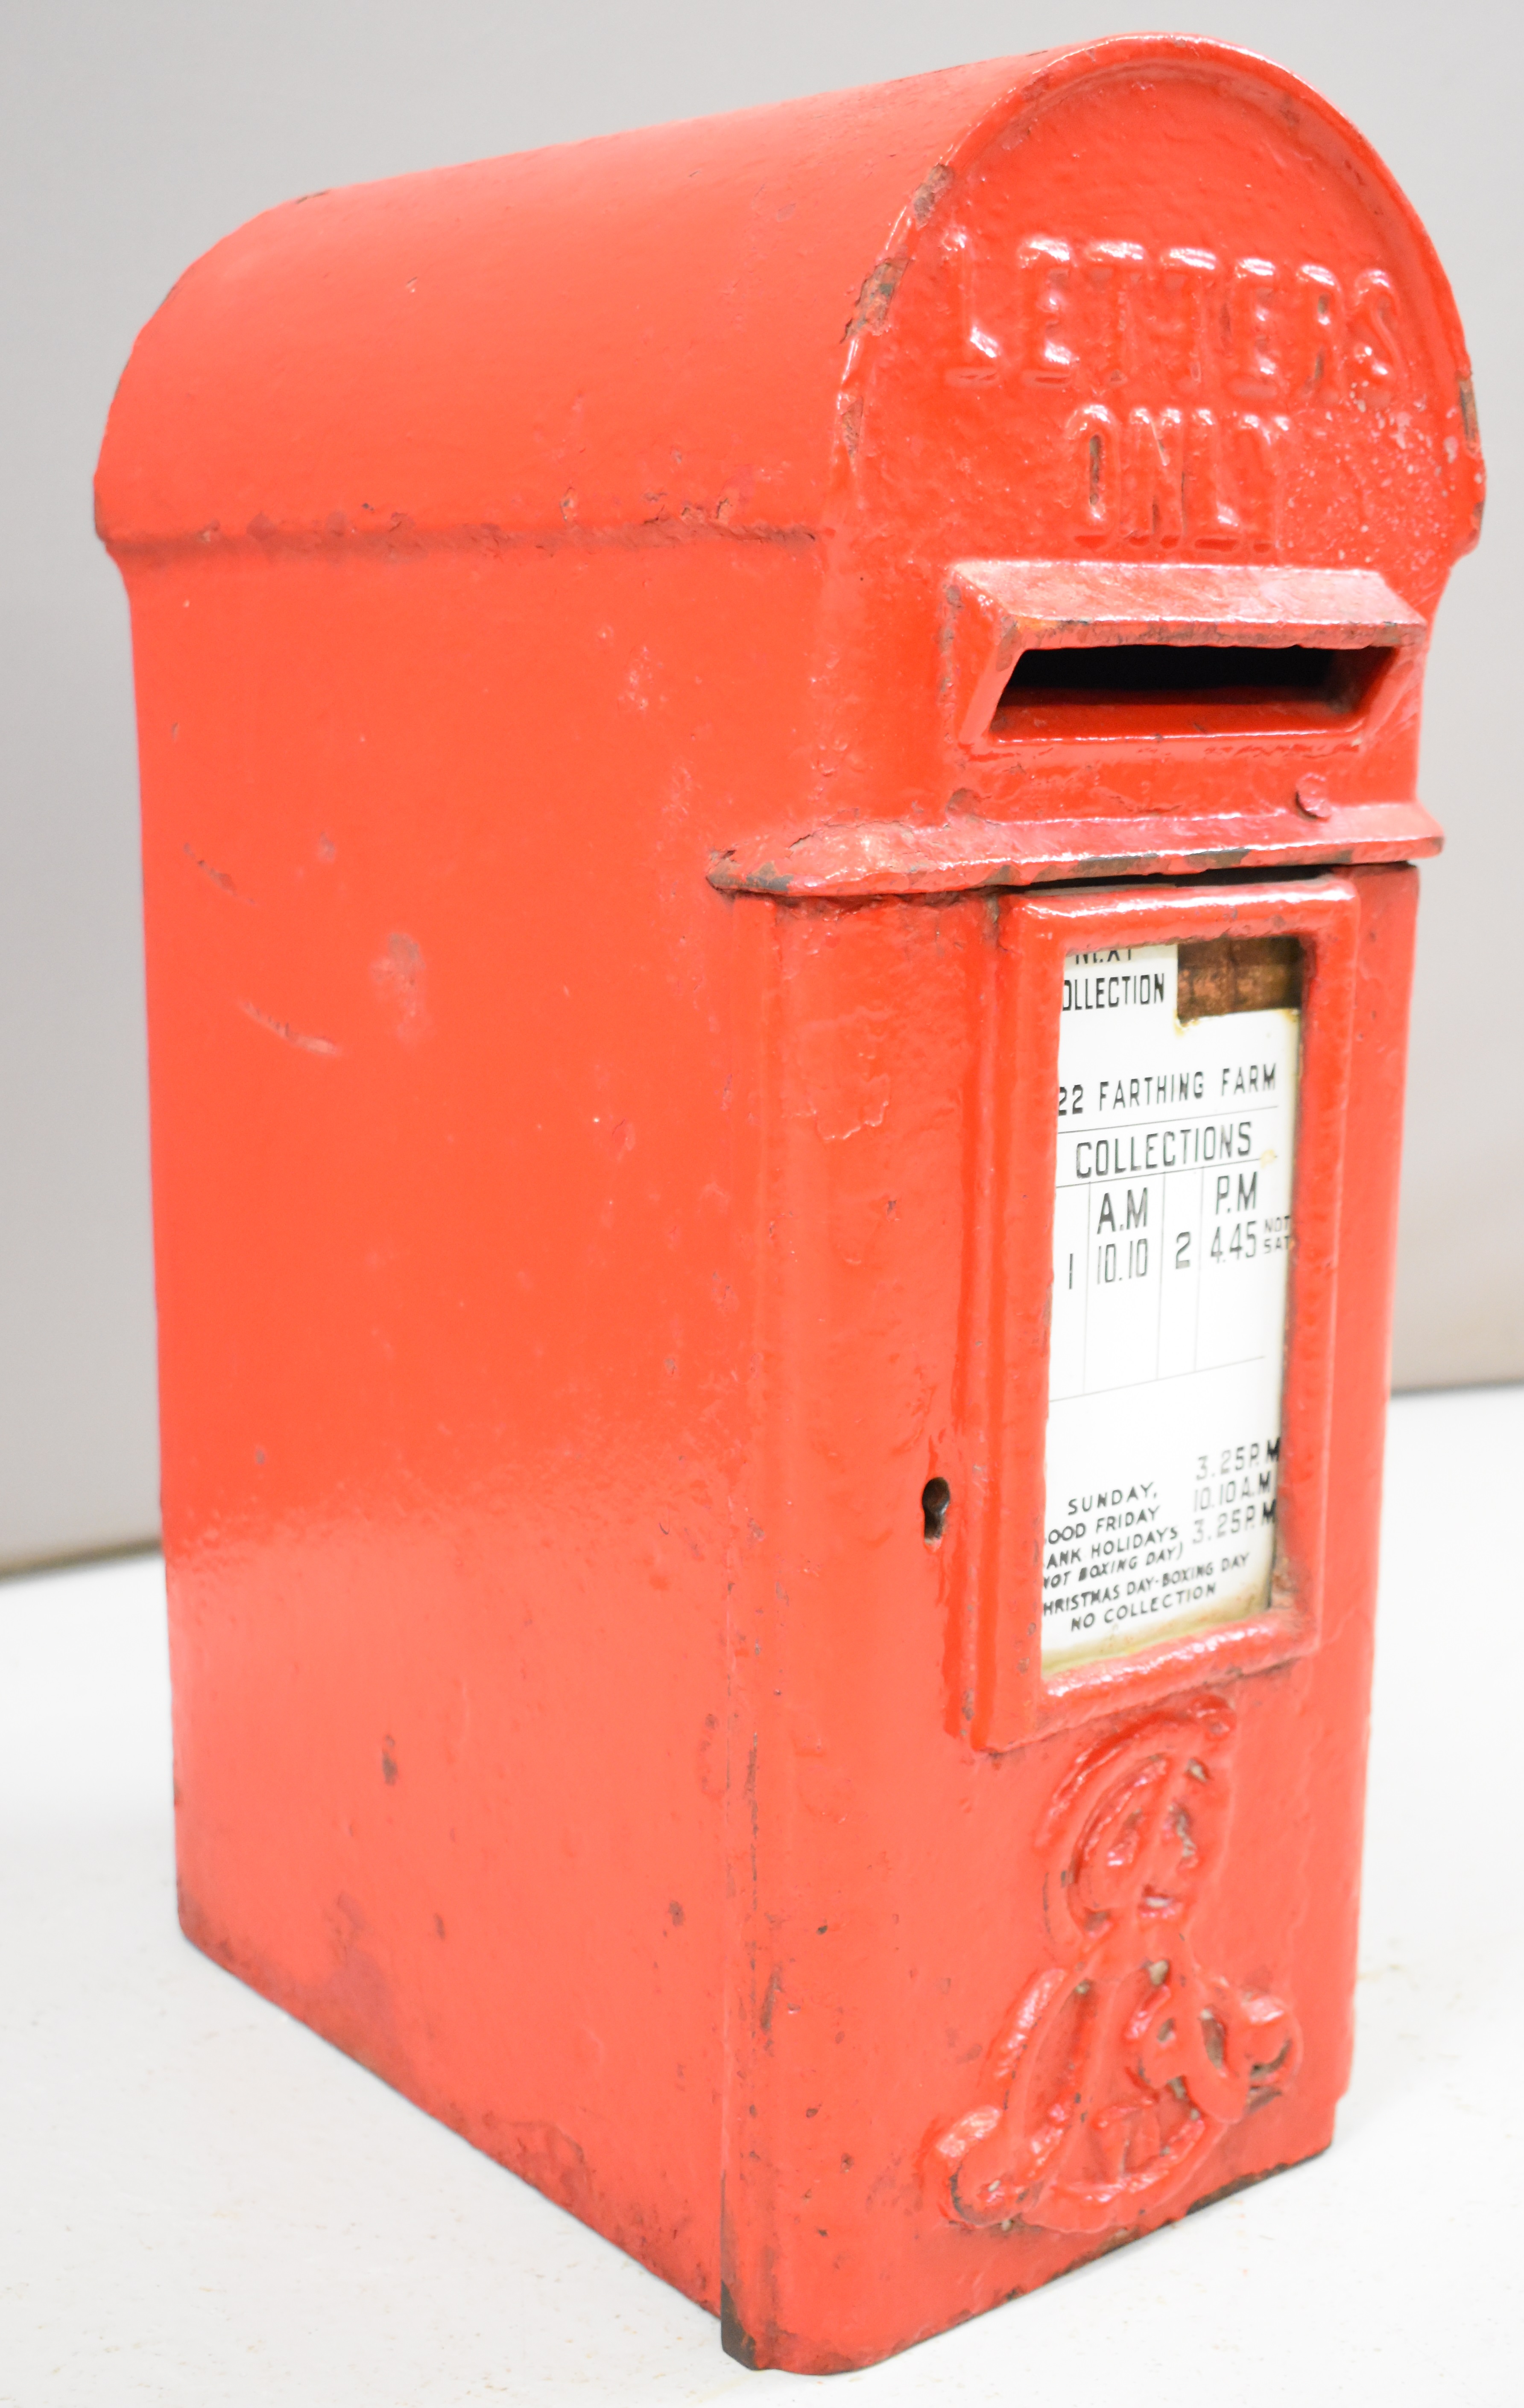 Edward VII cast iron lamp post mounted post box with enamel plate to door for Farthing Farm, - Image 2 of 11